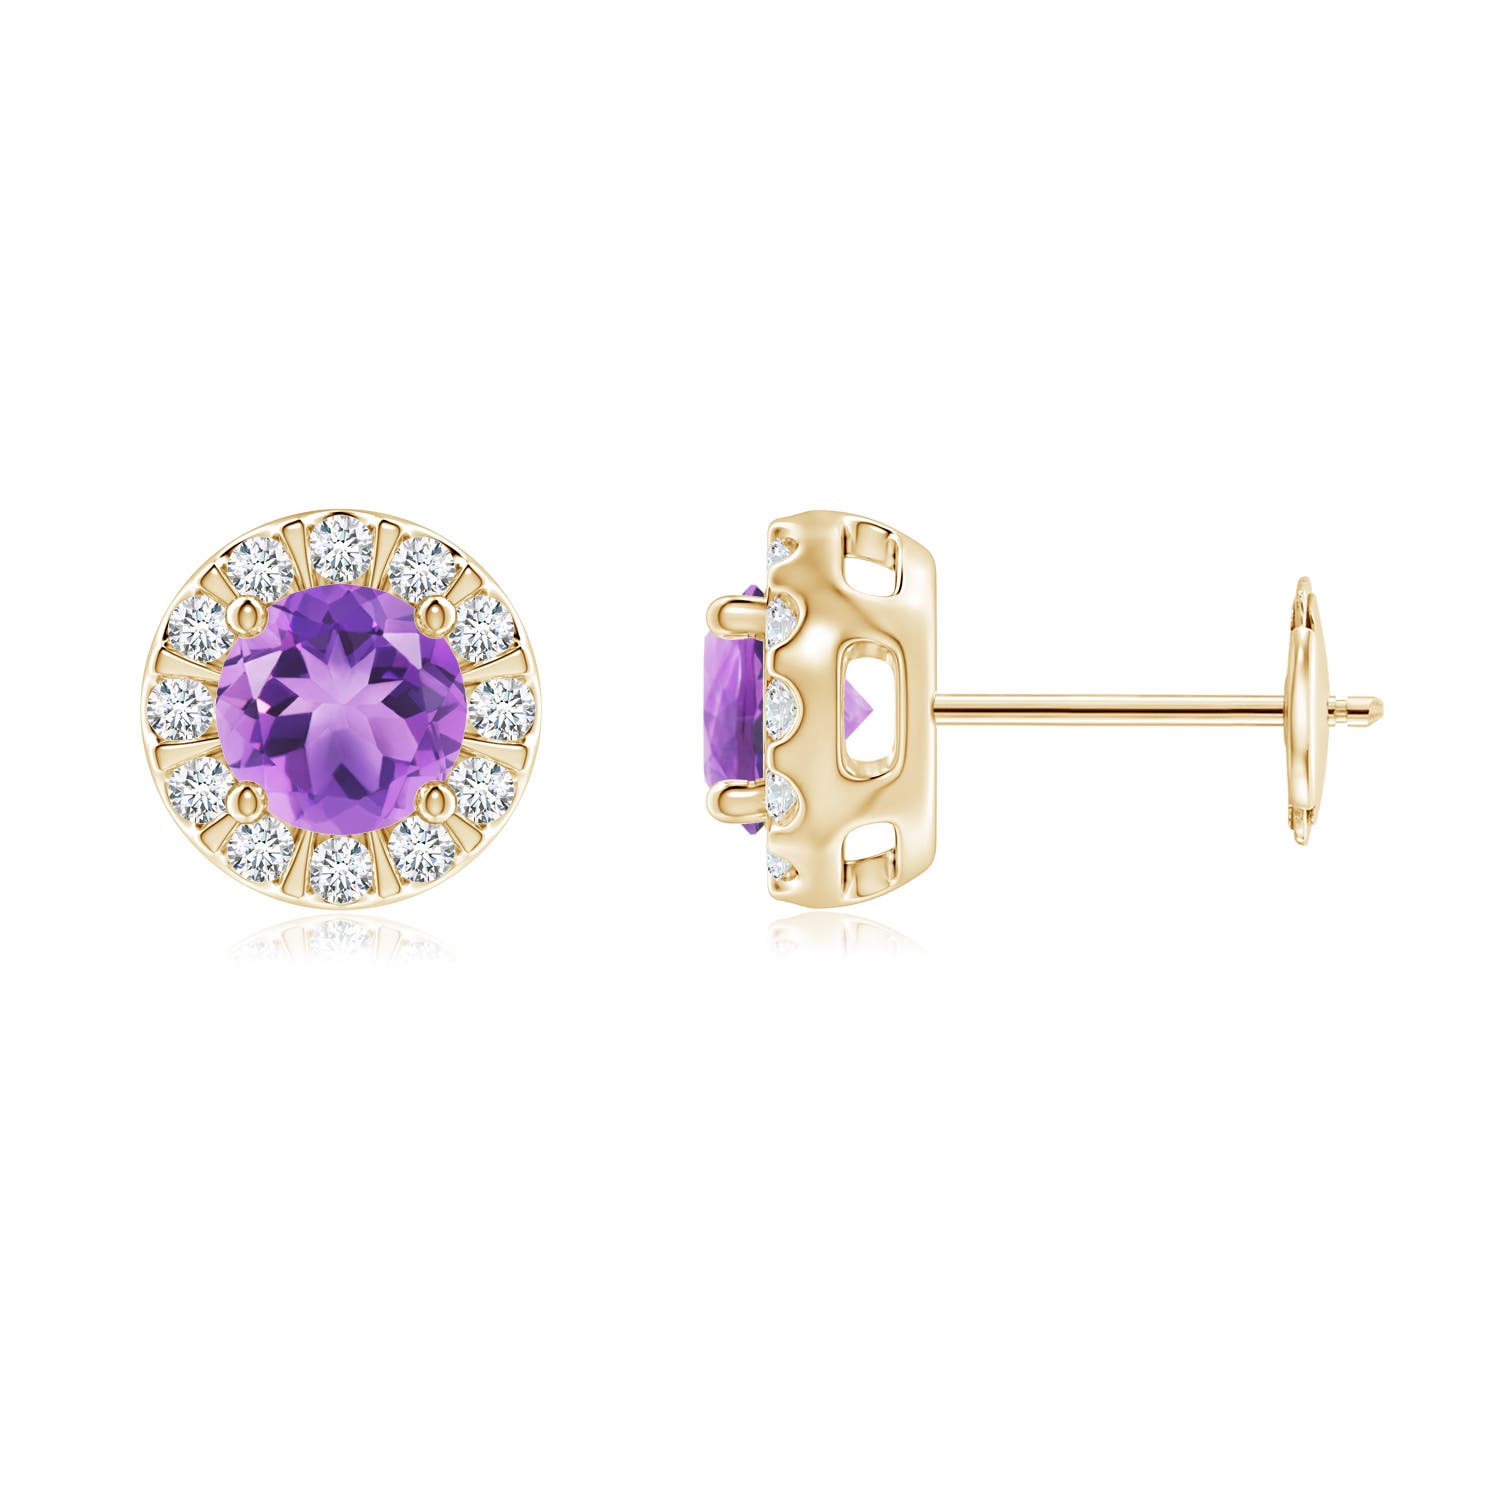 A - Amethyst / 1.19 CT / 14 KT Yellow Gold